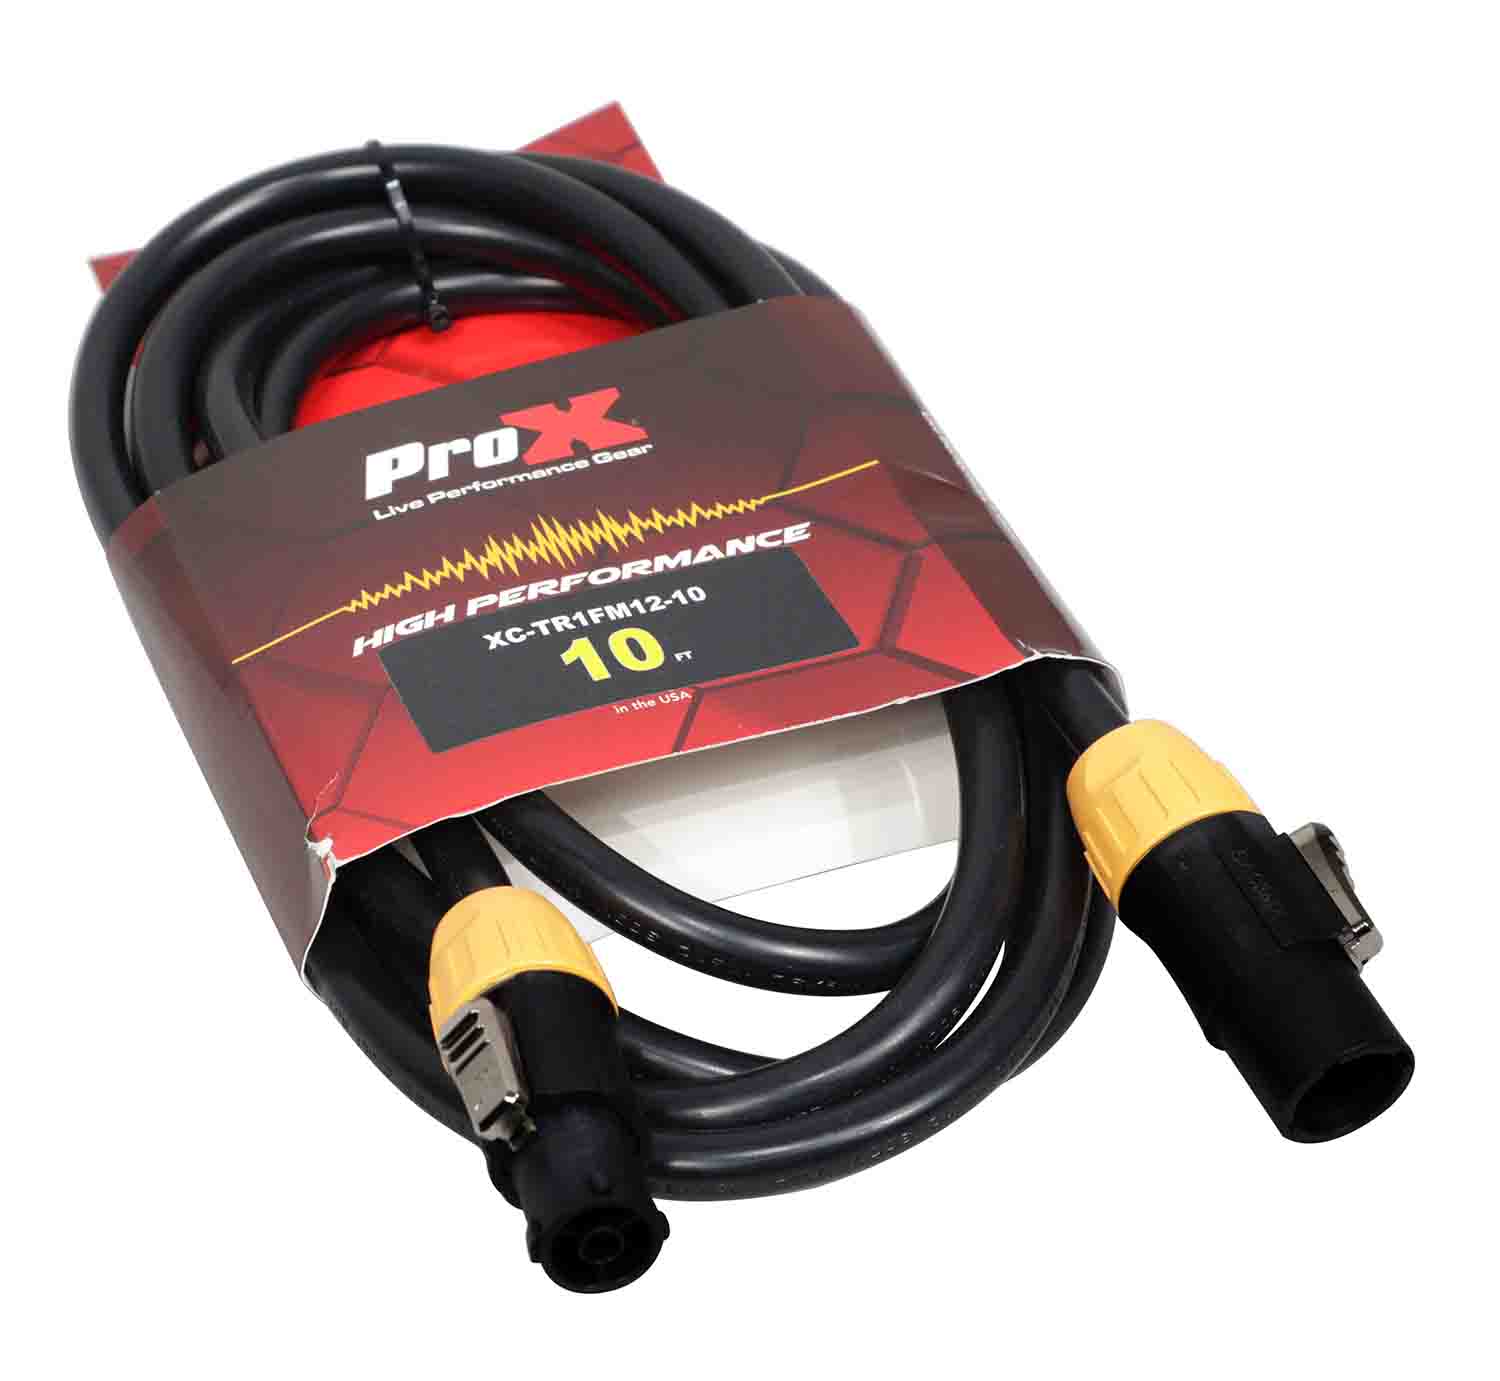 ProX XC-TR1FM12-06 Male to Female 12AWG Power Cable for for TR1 Power Connection compatible devices - 6 Feet - Hollywood DJ